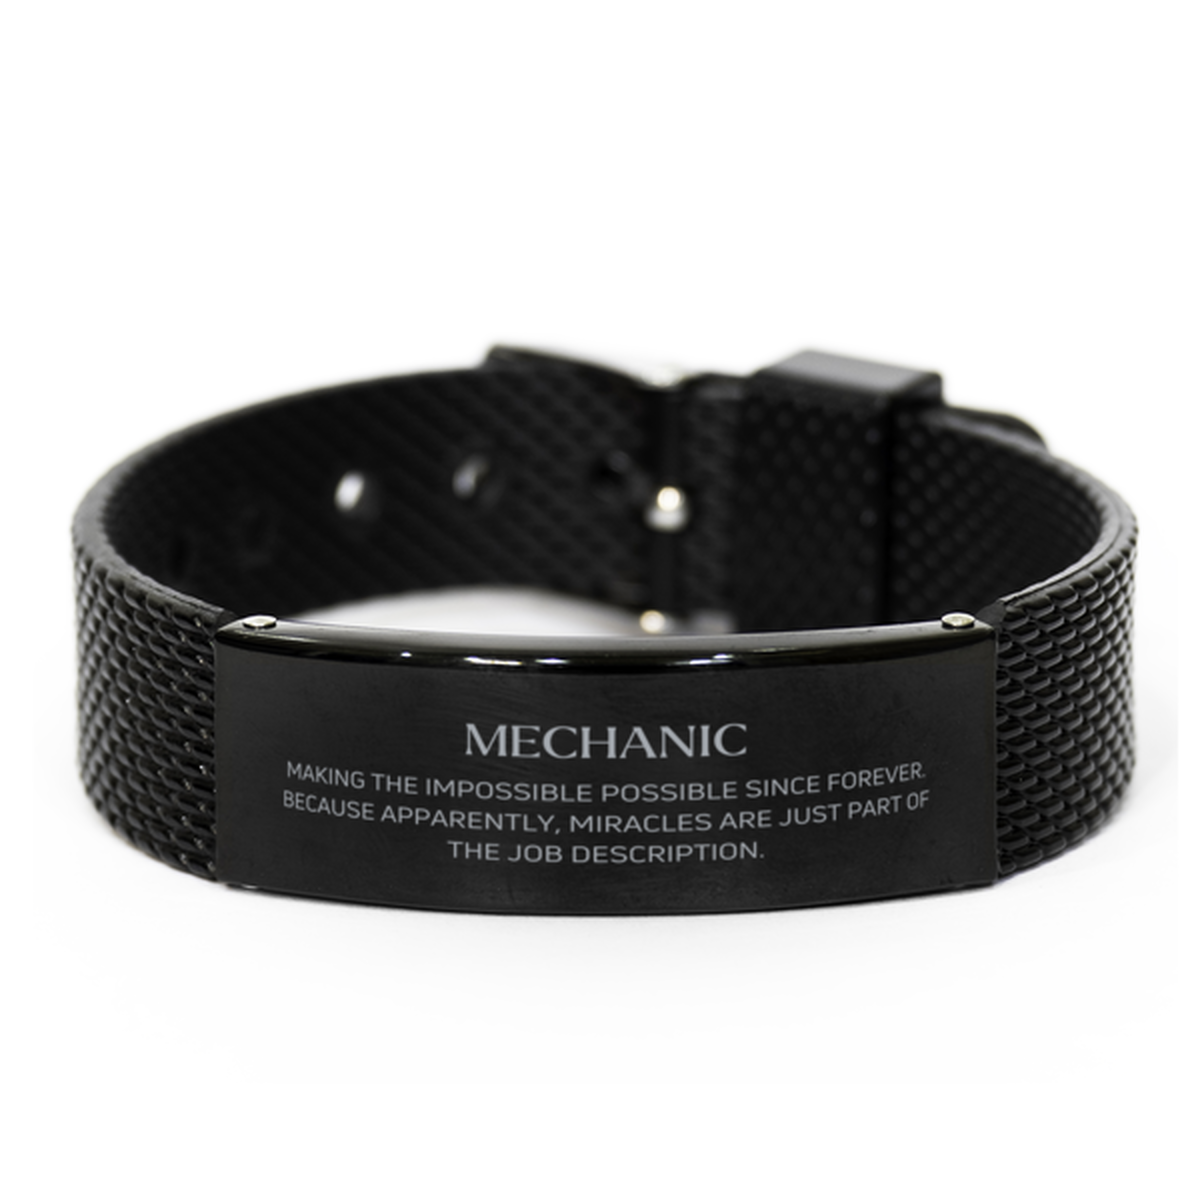 Funny Mechanic Gifts, Miracles are just part of the job description, Inspirational Birthday Black Shark Mesh Bracelet For Mechanic, Men, Women, Coworkers, Friends, Boss